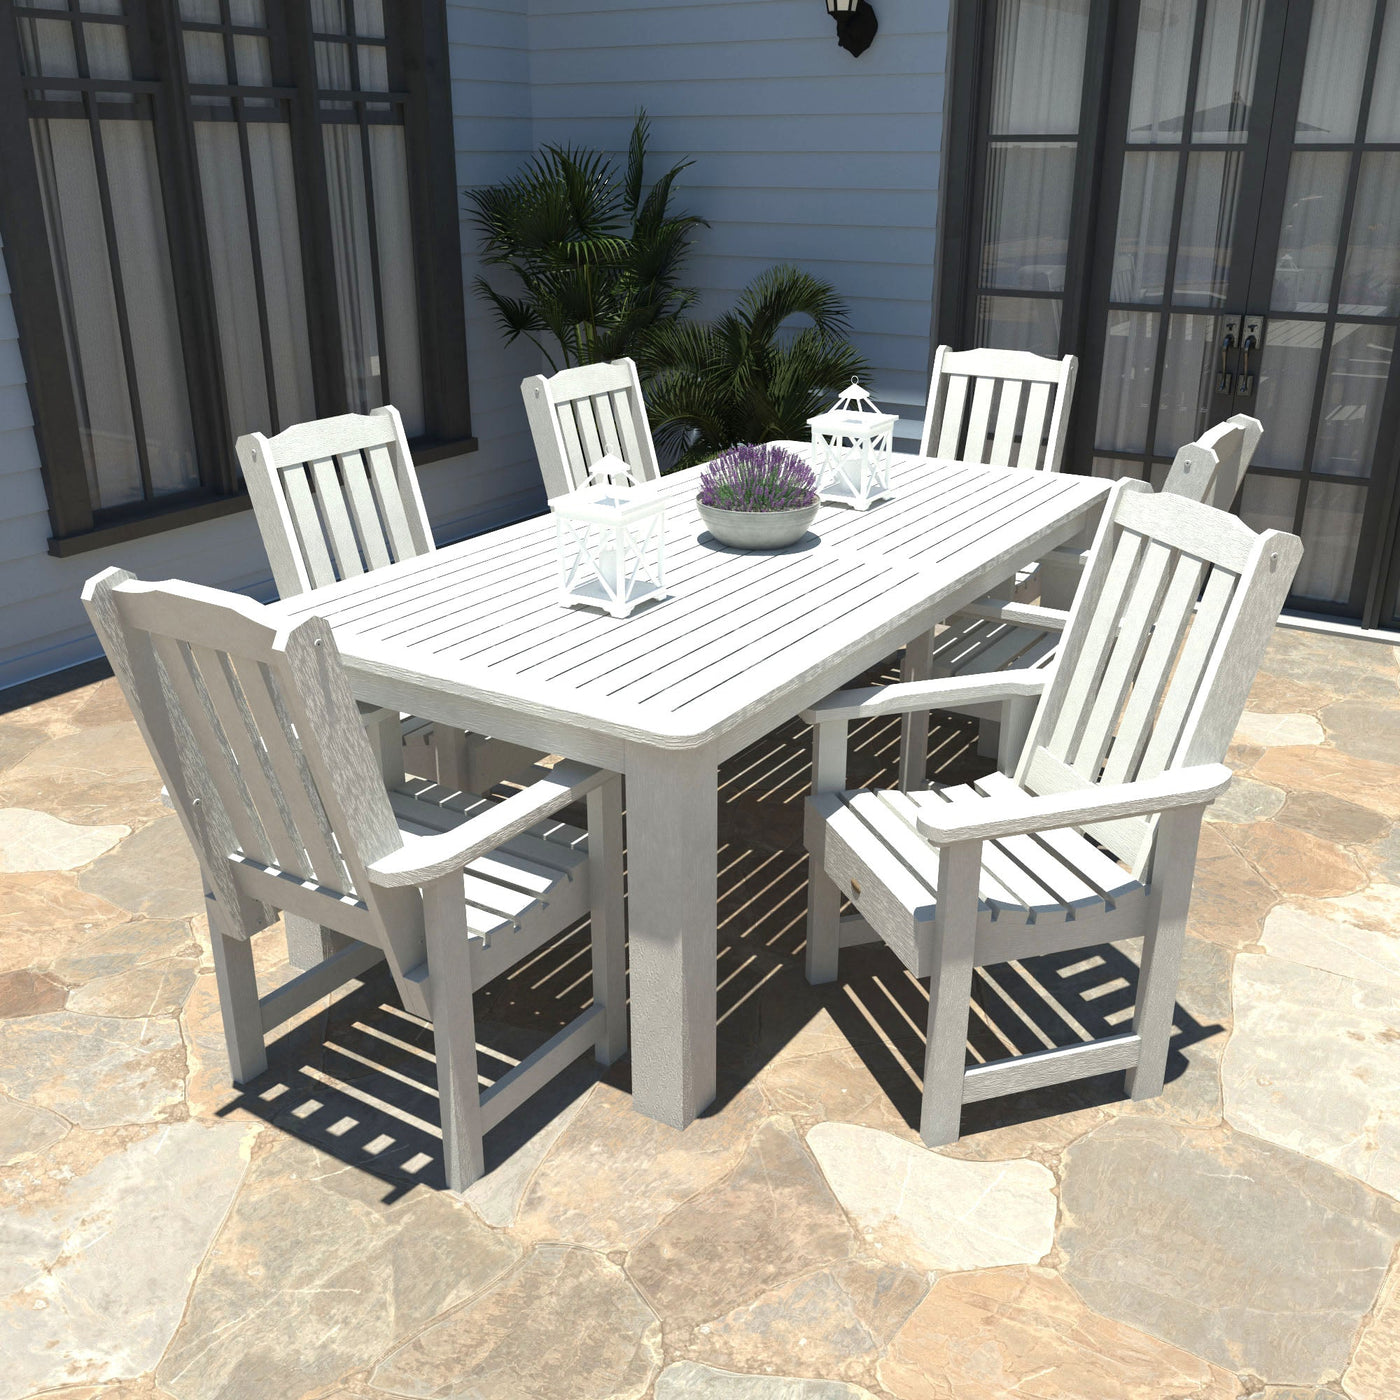 Lehigh 7pc Rectangular Outdoor Dining Set 42in x 84in - Dining Height Dining Highwood USA 